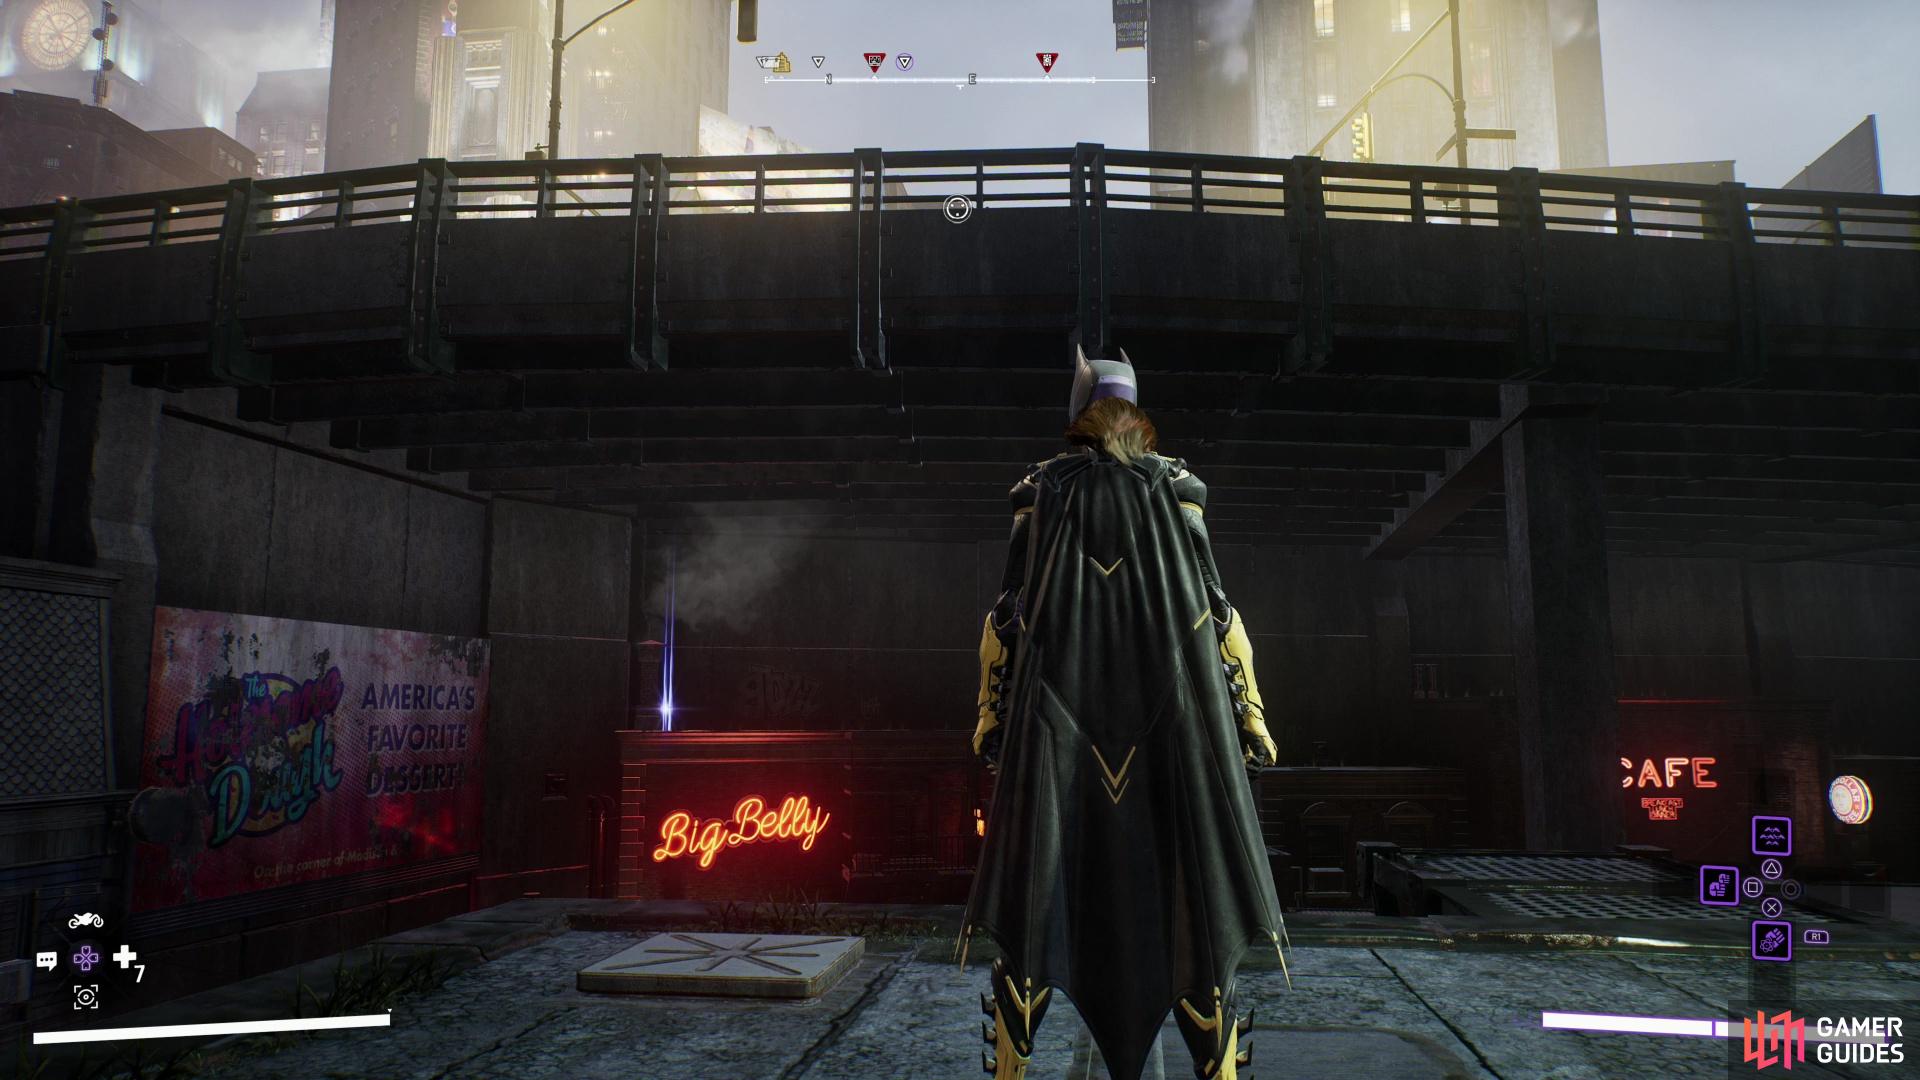 A Batarang can be found on the roof of the Big Belly Diner, under the Gate Street Bridge.